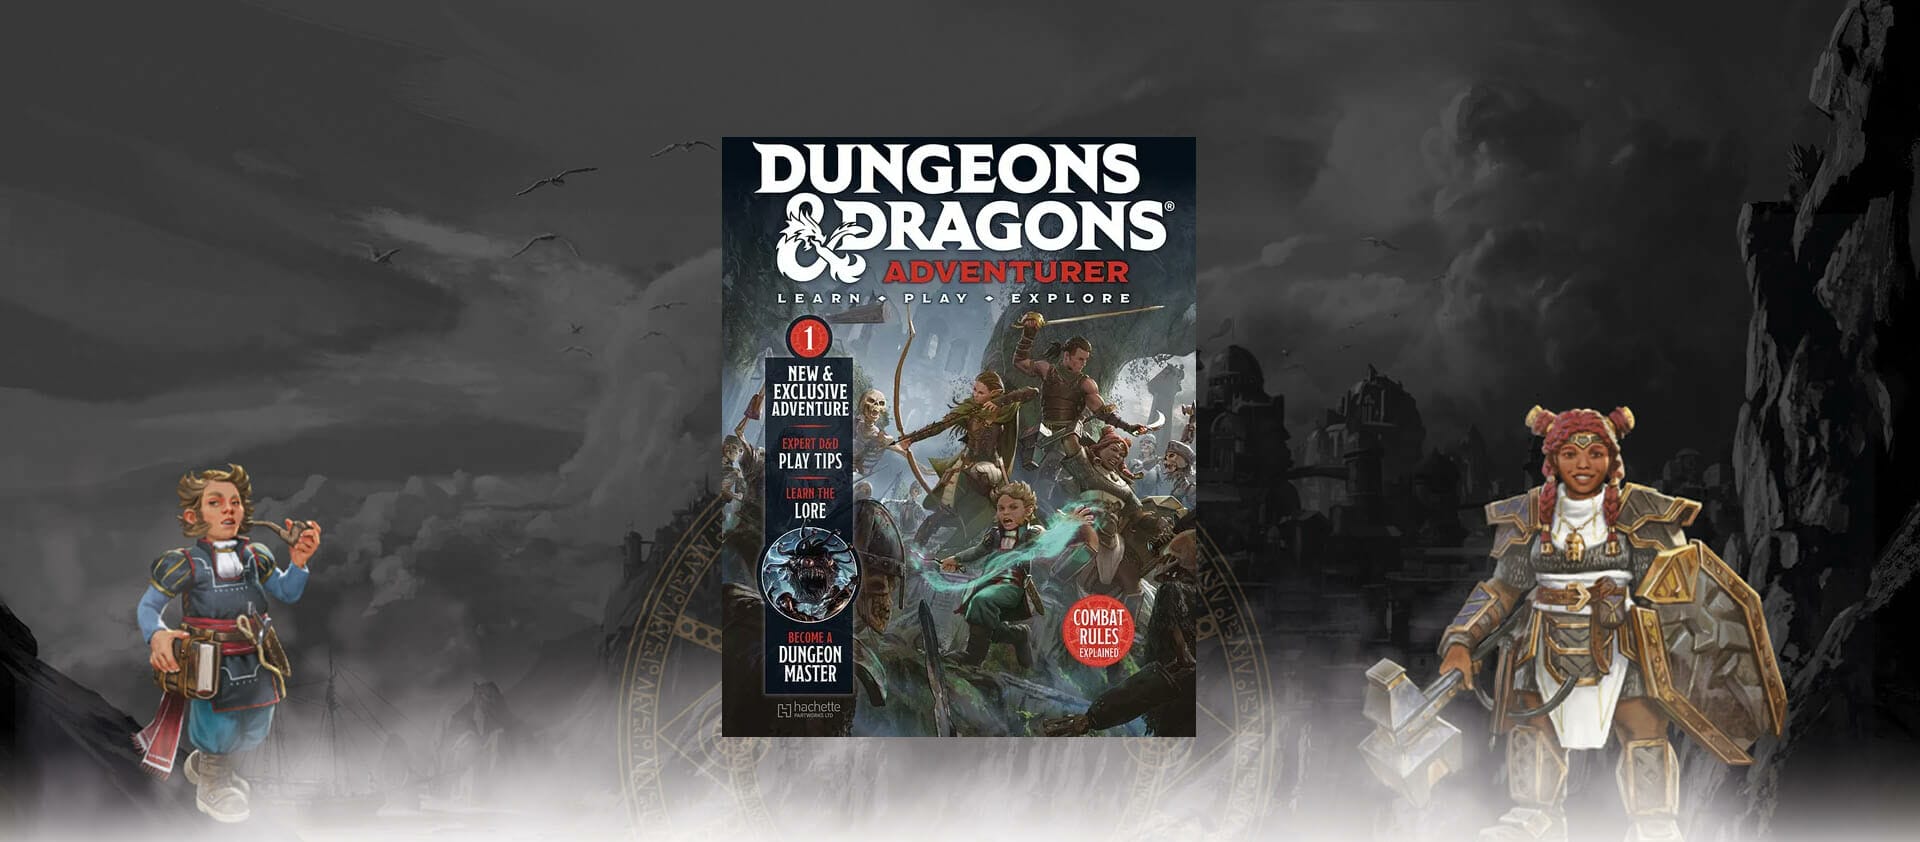 Dungeons & Dragons: Adventurer - Hatchette launches new and 